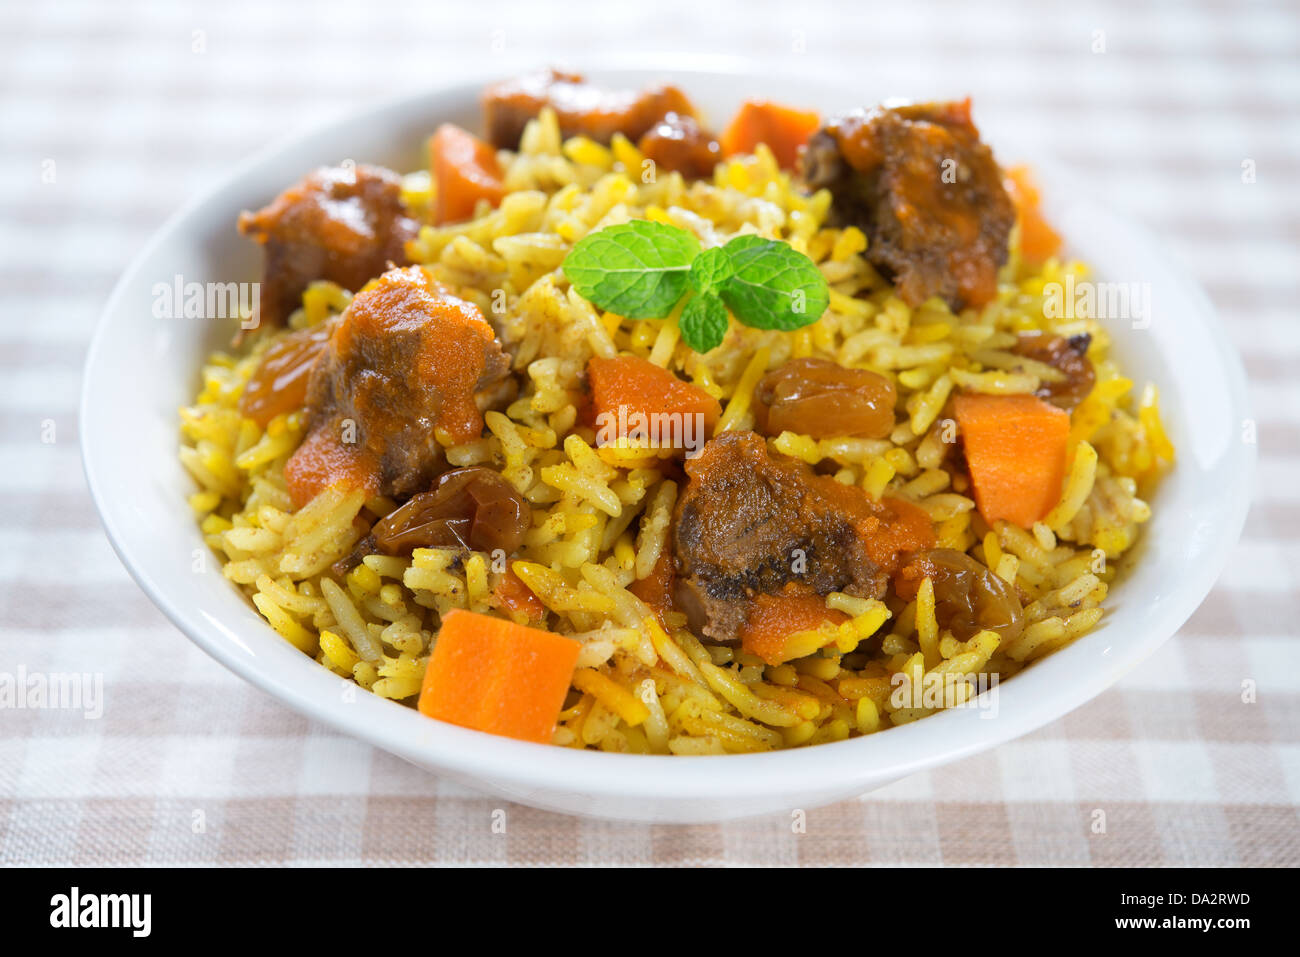 Arabic mutton rice. Arab middle eastern food. Stock Photo